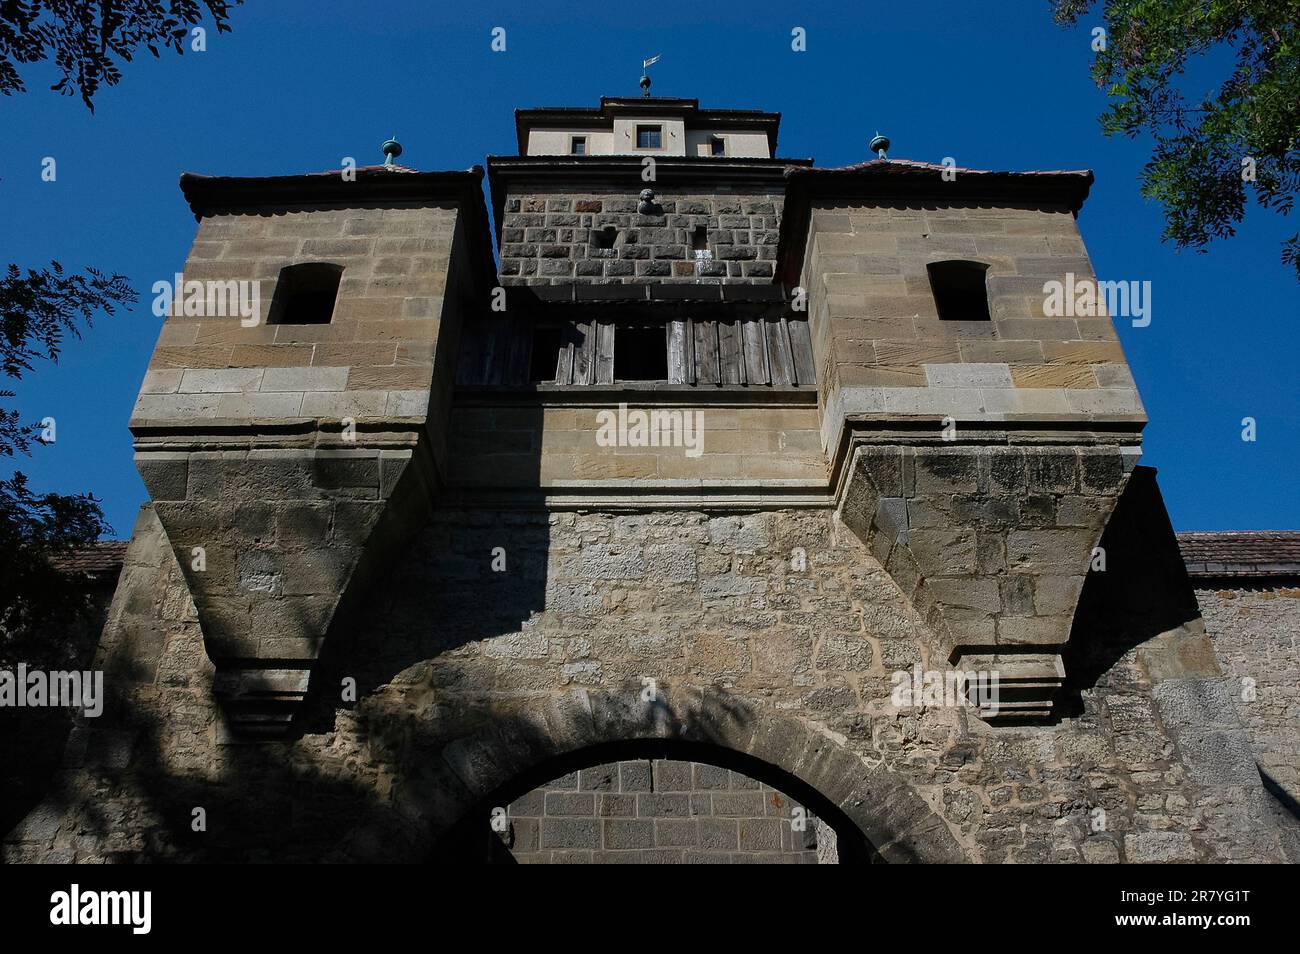 Inner face of the Galgentor or Gallows Gate, built c.1388 beside a public execution site, in Rothenburg ob der Tauber, Bavaria, Germany. Stock Photo